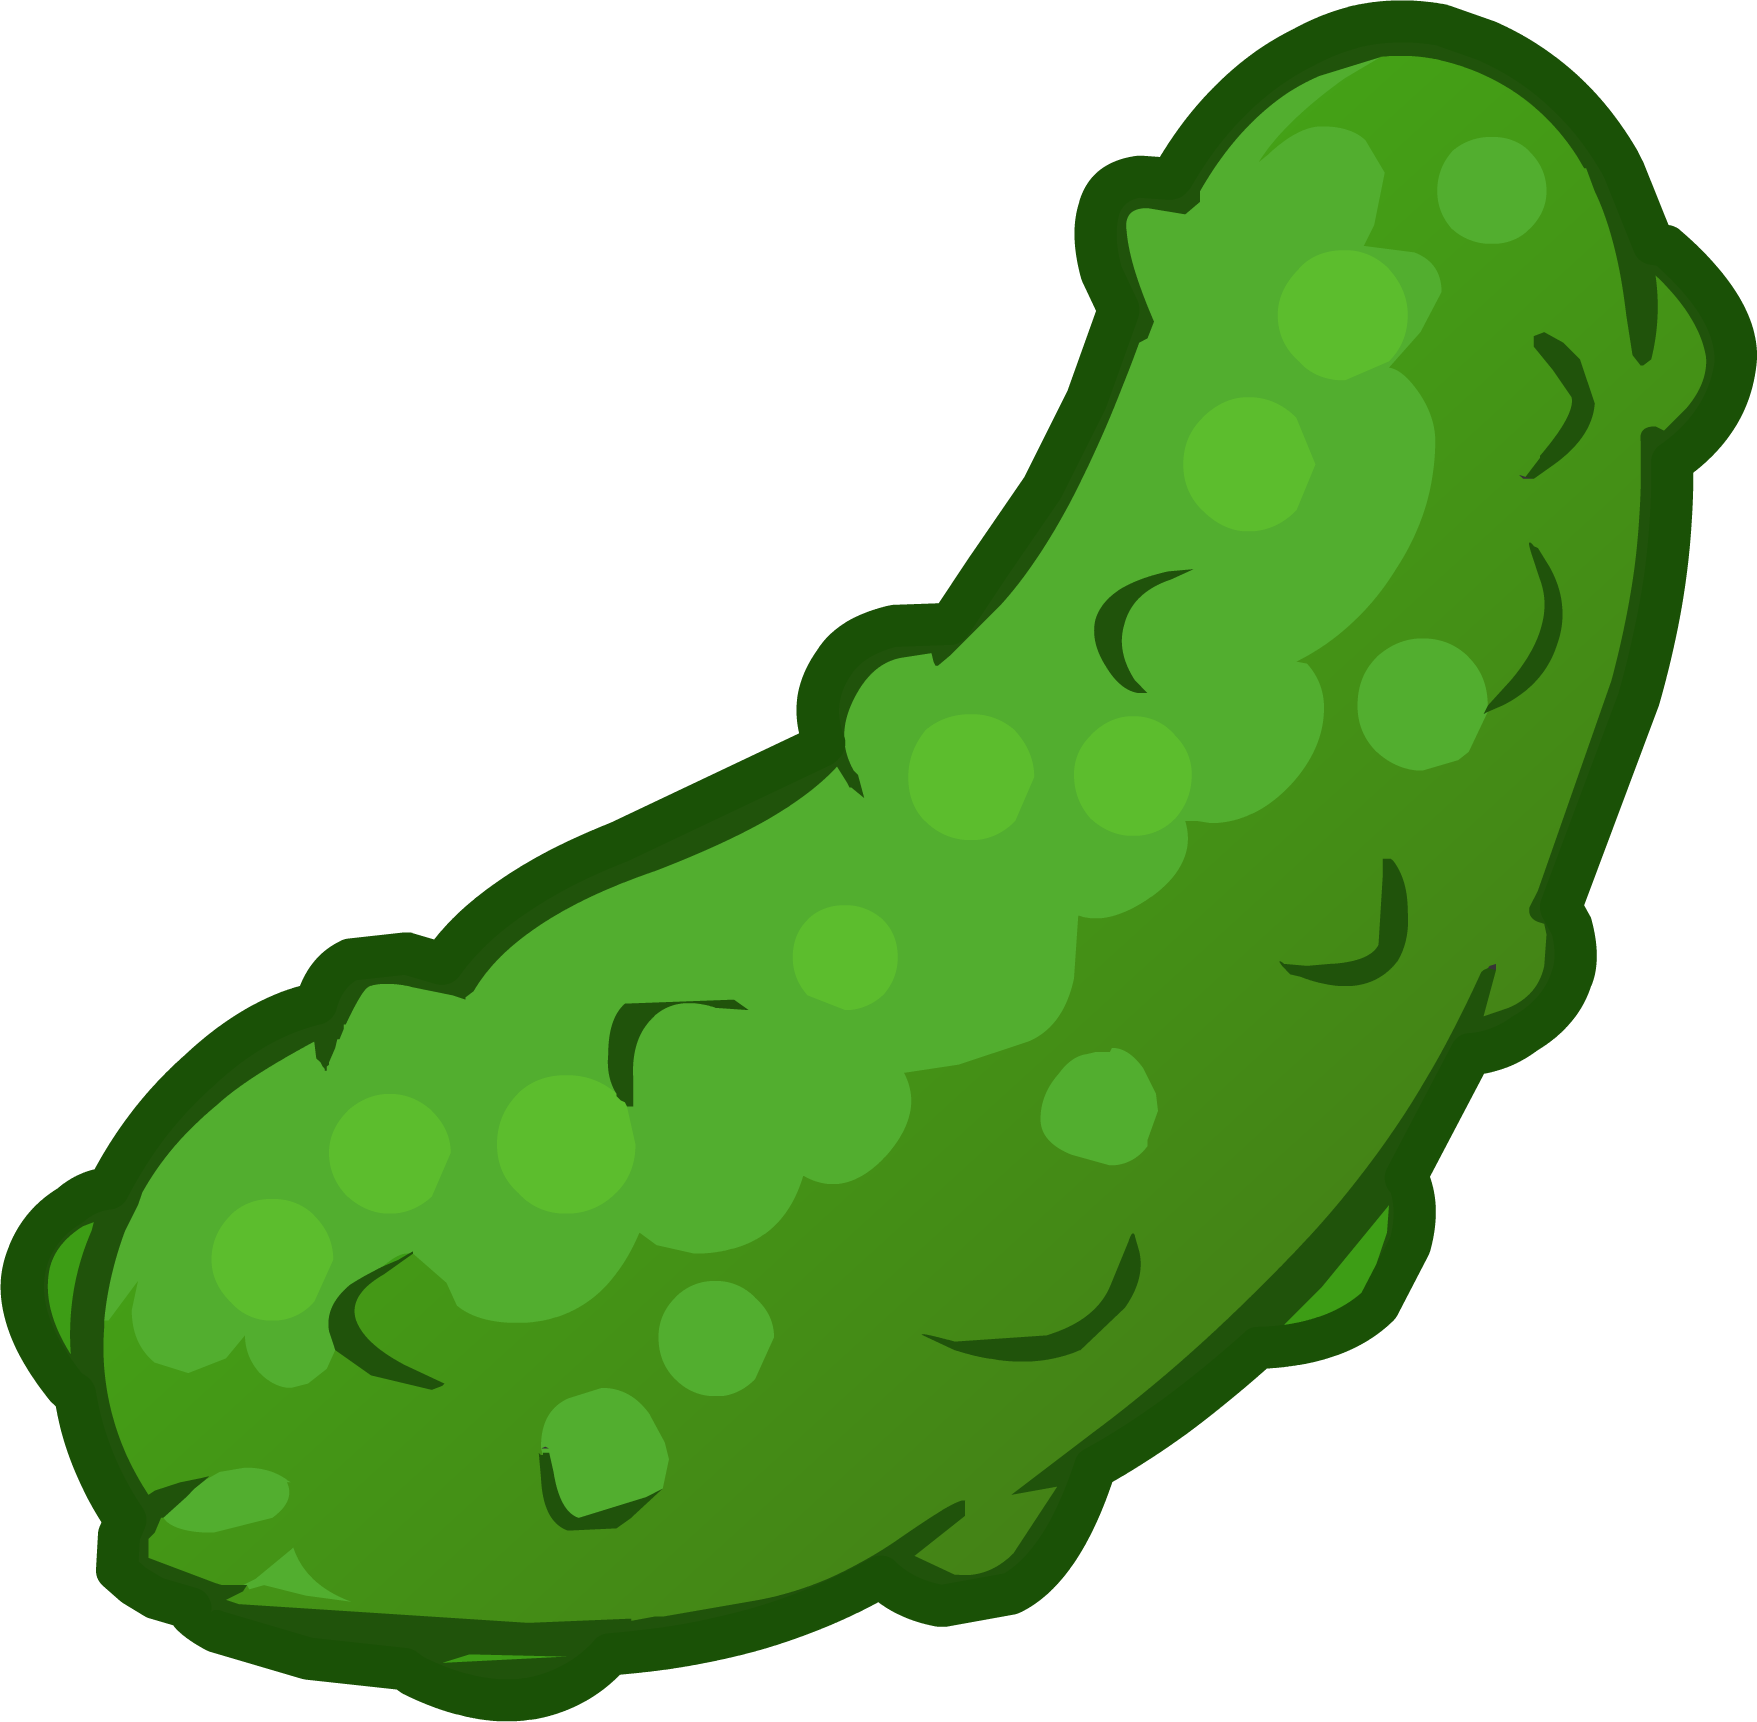 Free pickles cliparts download. Nutrition clipart animated